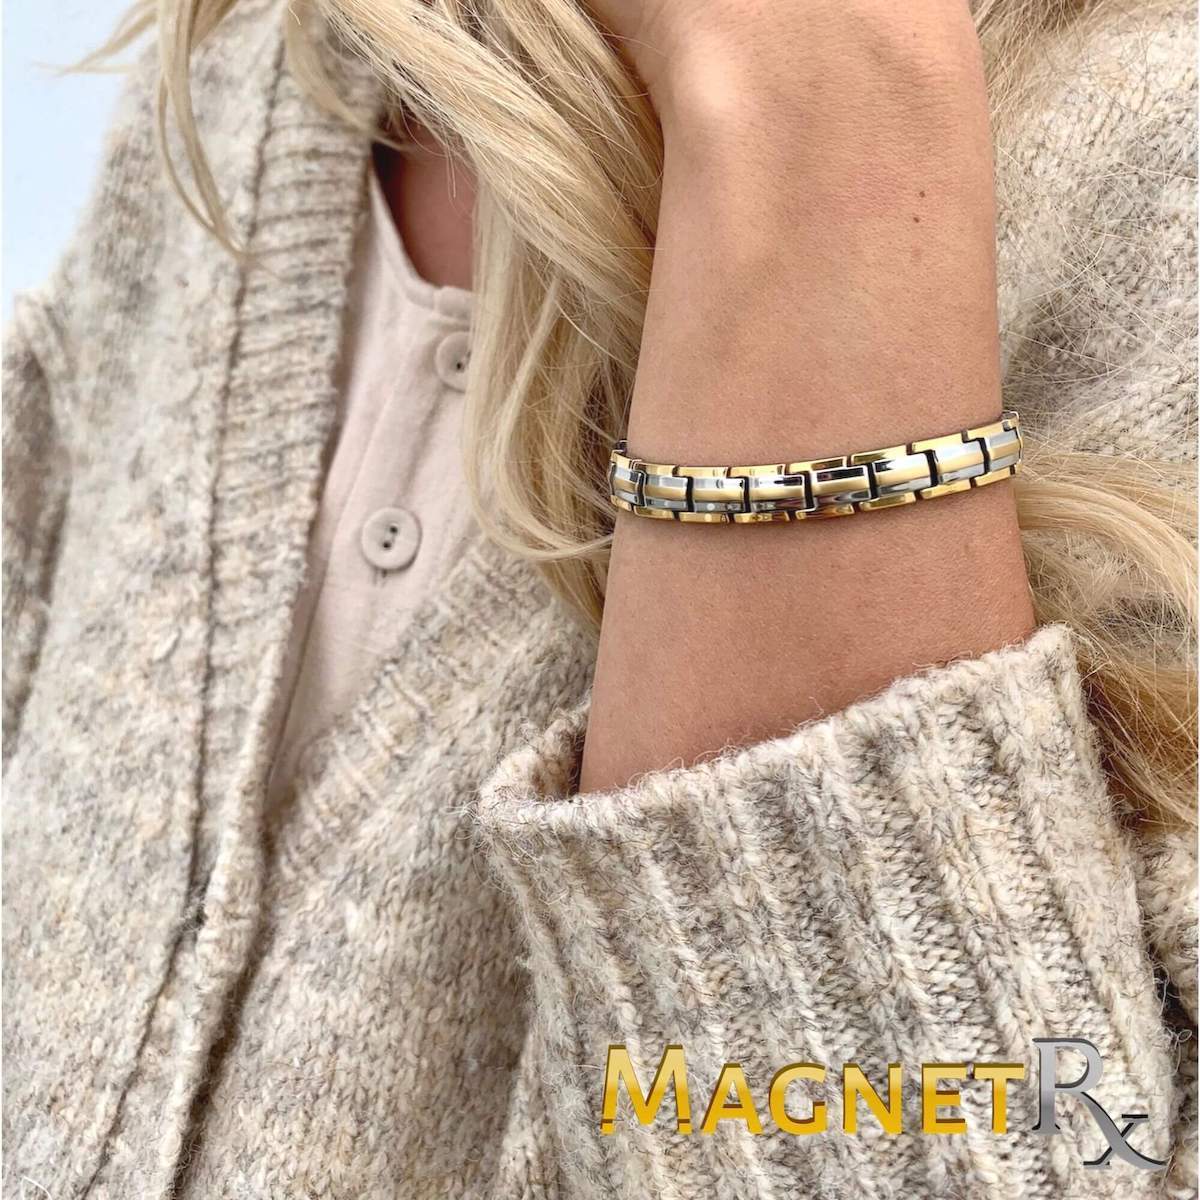 MagnetRX® Women's Ultra Strength Magnetic Bracelet - Titanium Magnetic  Bracelets for Women - Adjustable Length with Sizing Tool (Silver & Gold) -  Walmart.com